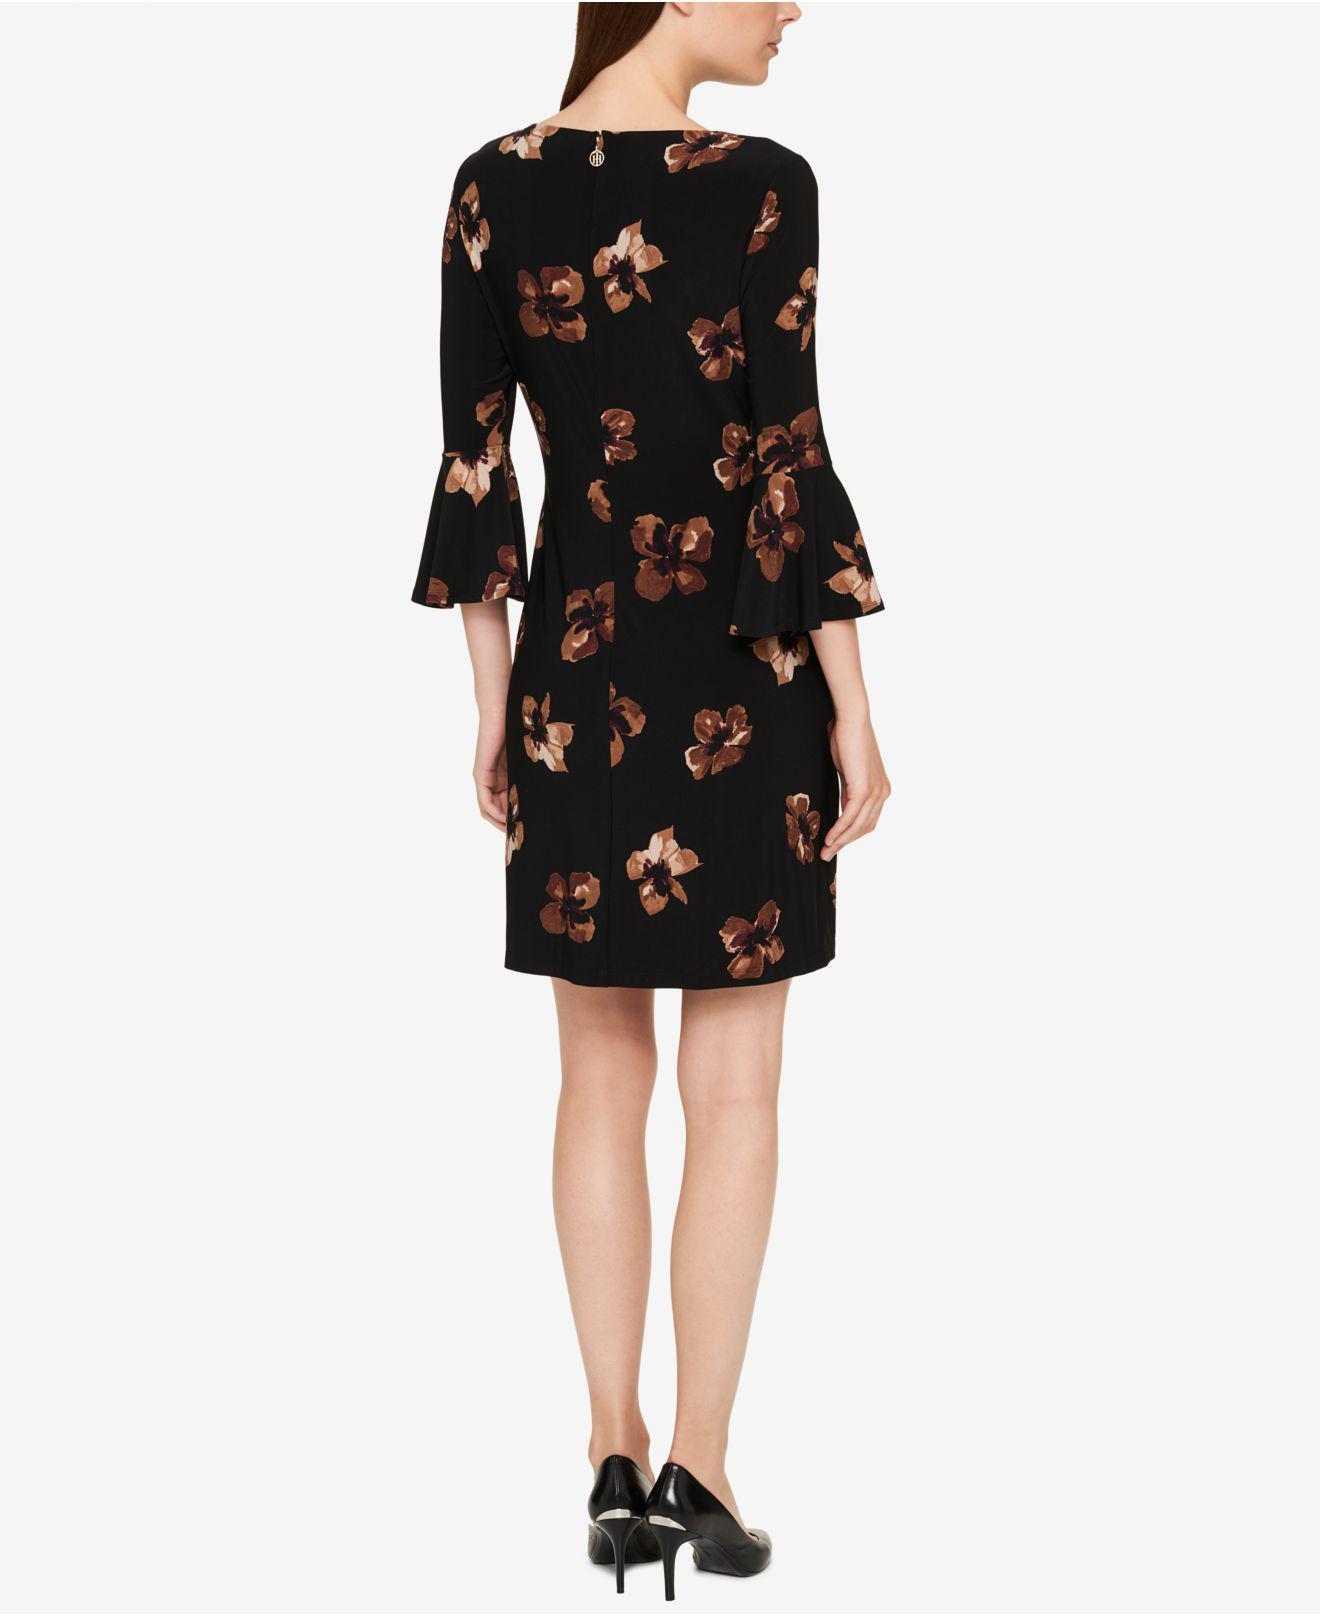 Tommy Hilfiger Synthetic Printed Bell-sleeve Dress in Black - Lyst